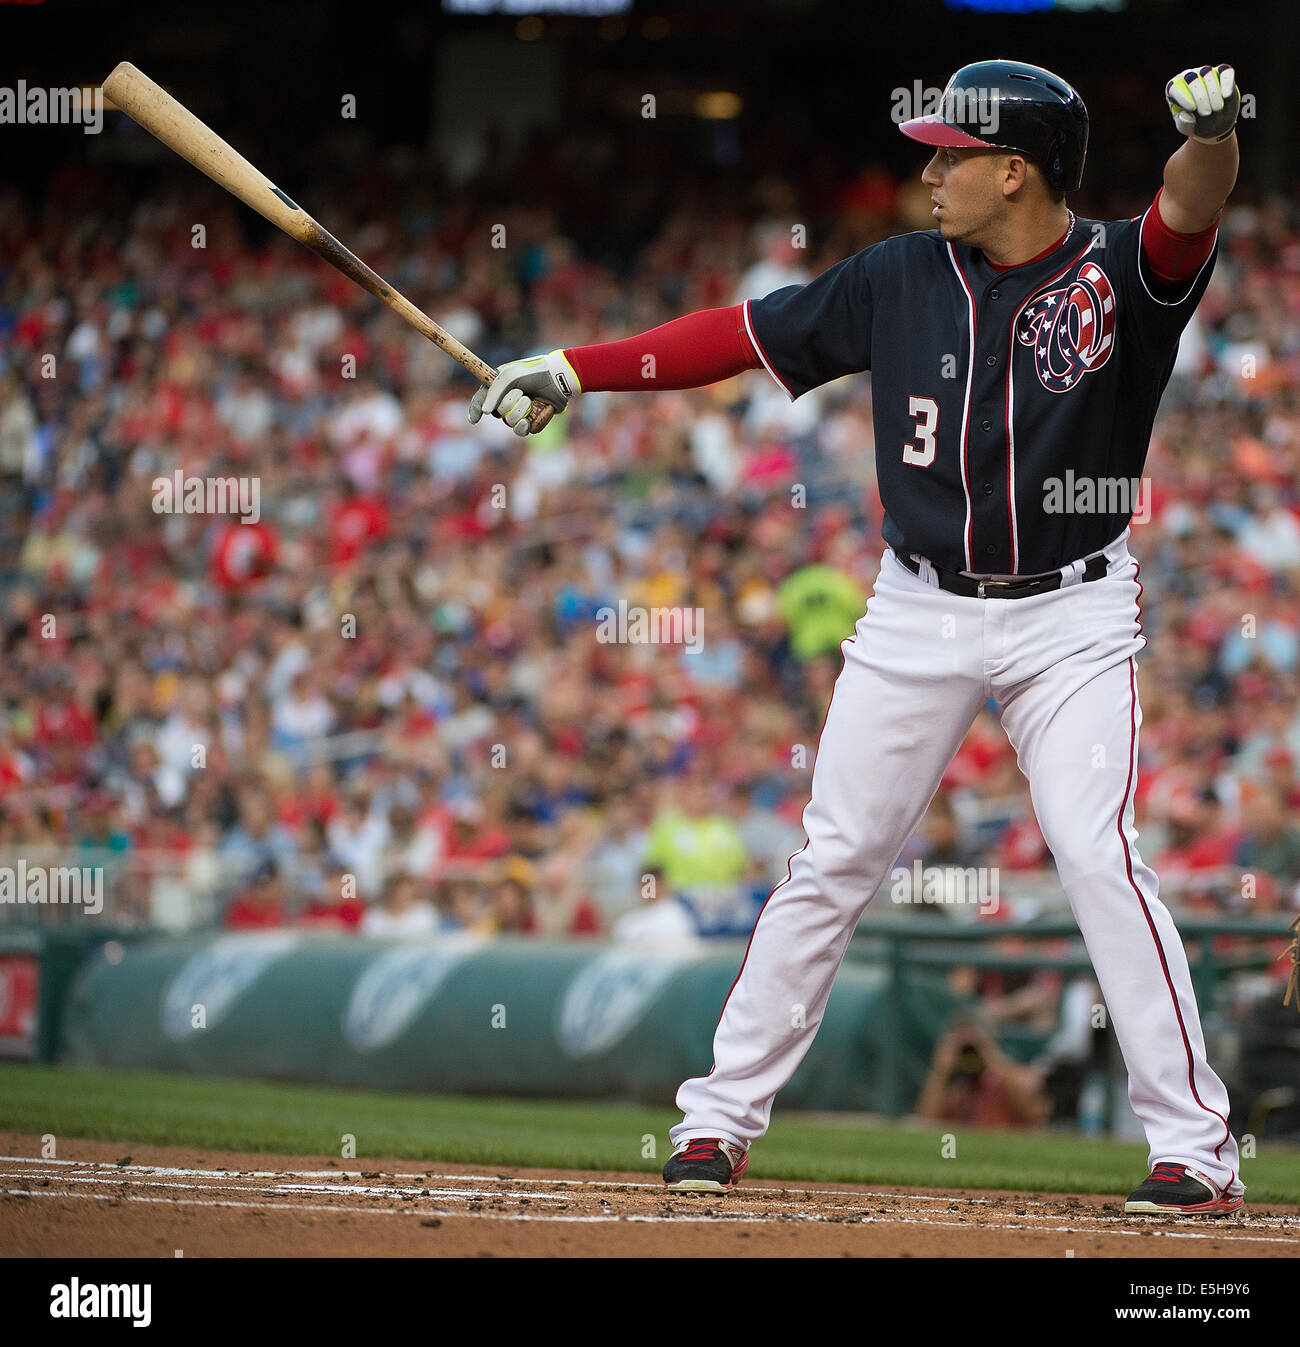 Washington DC, USA. 15th Aug, 2014. Washington Nationals second baseman Asdrubal Cabrera (3) bats against the Pittsburgh Pirates during the first inning of their game at Nationals Park in Washington, D.C, Friday, August 15, 2014. Credit:  Harry Walker/Alamy Live News Stock Photo